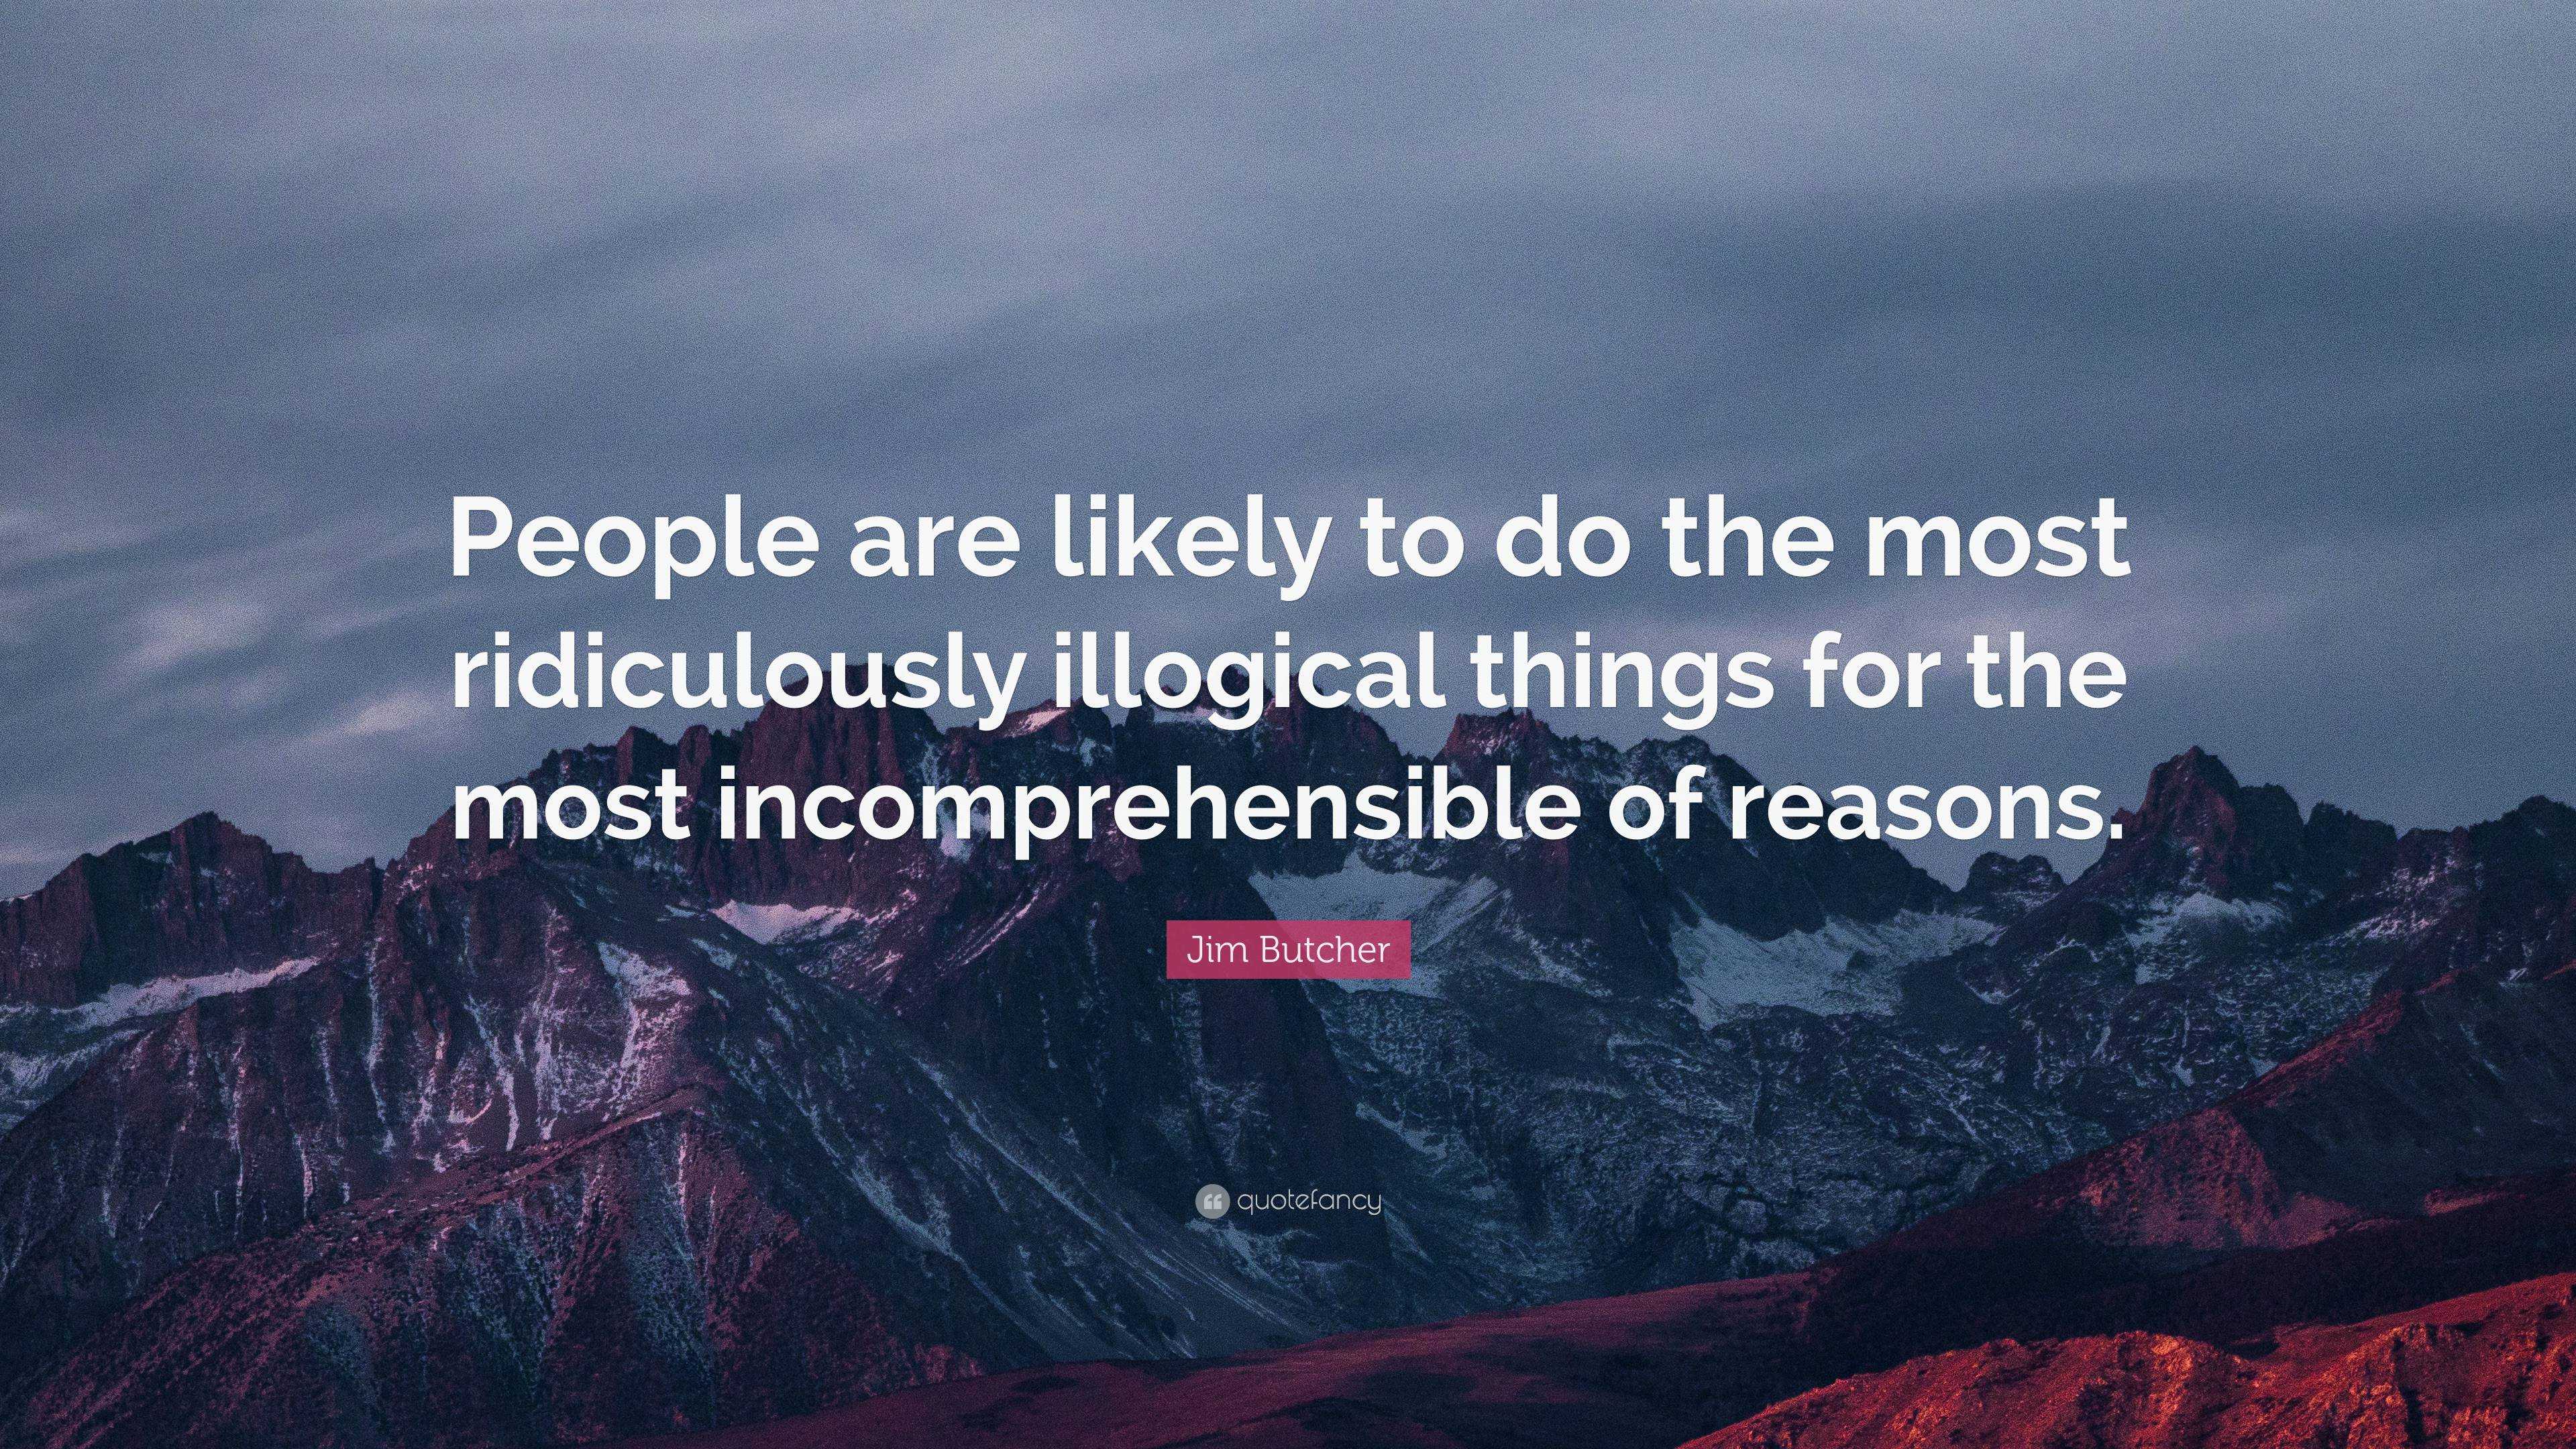 Jim Butcher Quote: “People are likely to do the most ridiculously ...